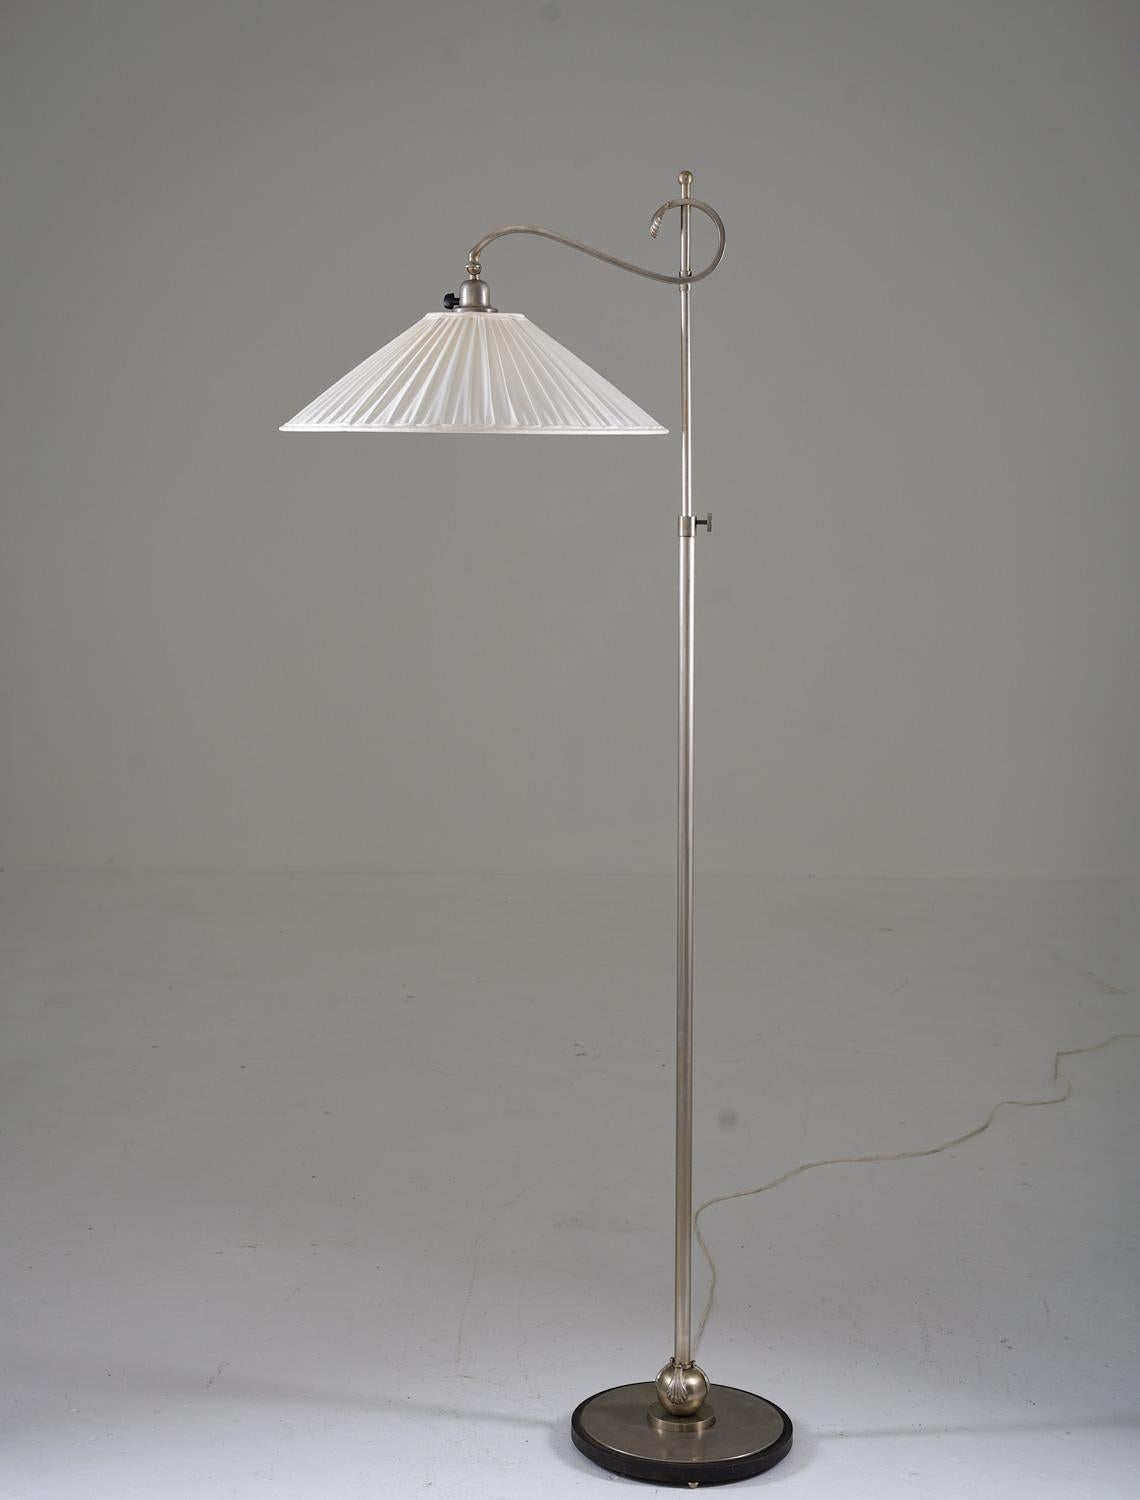 Lovely Swedish Grace floor lamp manufactured in the 1920s. 
This lamp is made of brushed steel and is constructed with impressive quality. The design is semi-minimalistic with beautiful details.
The height is adjustable and the maximum height is